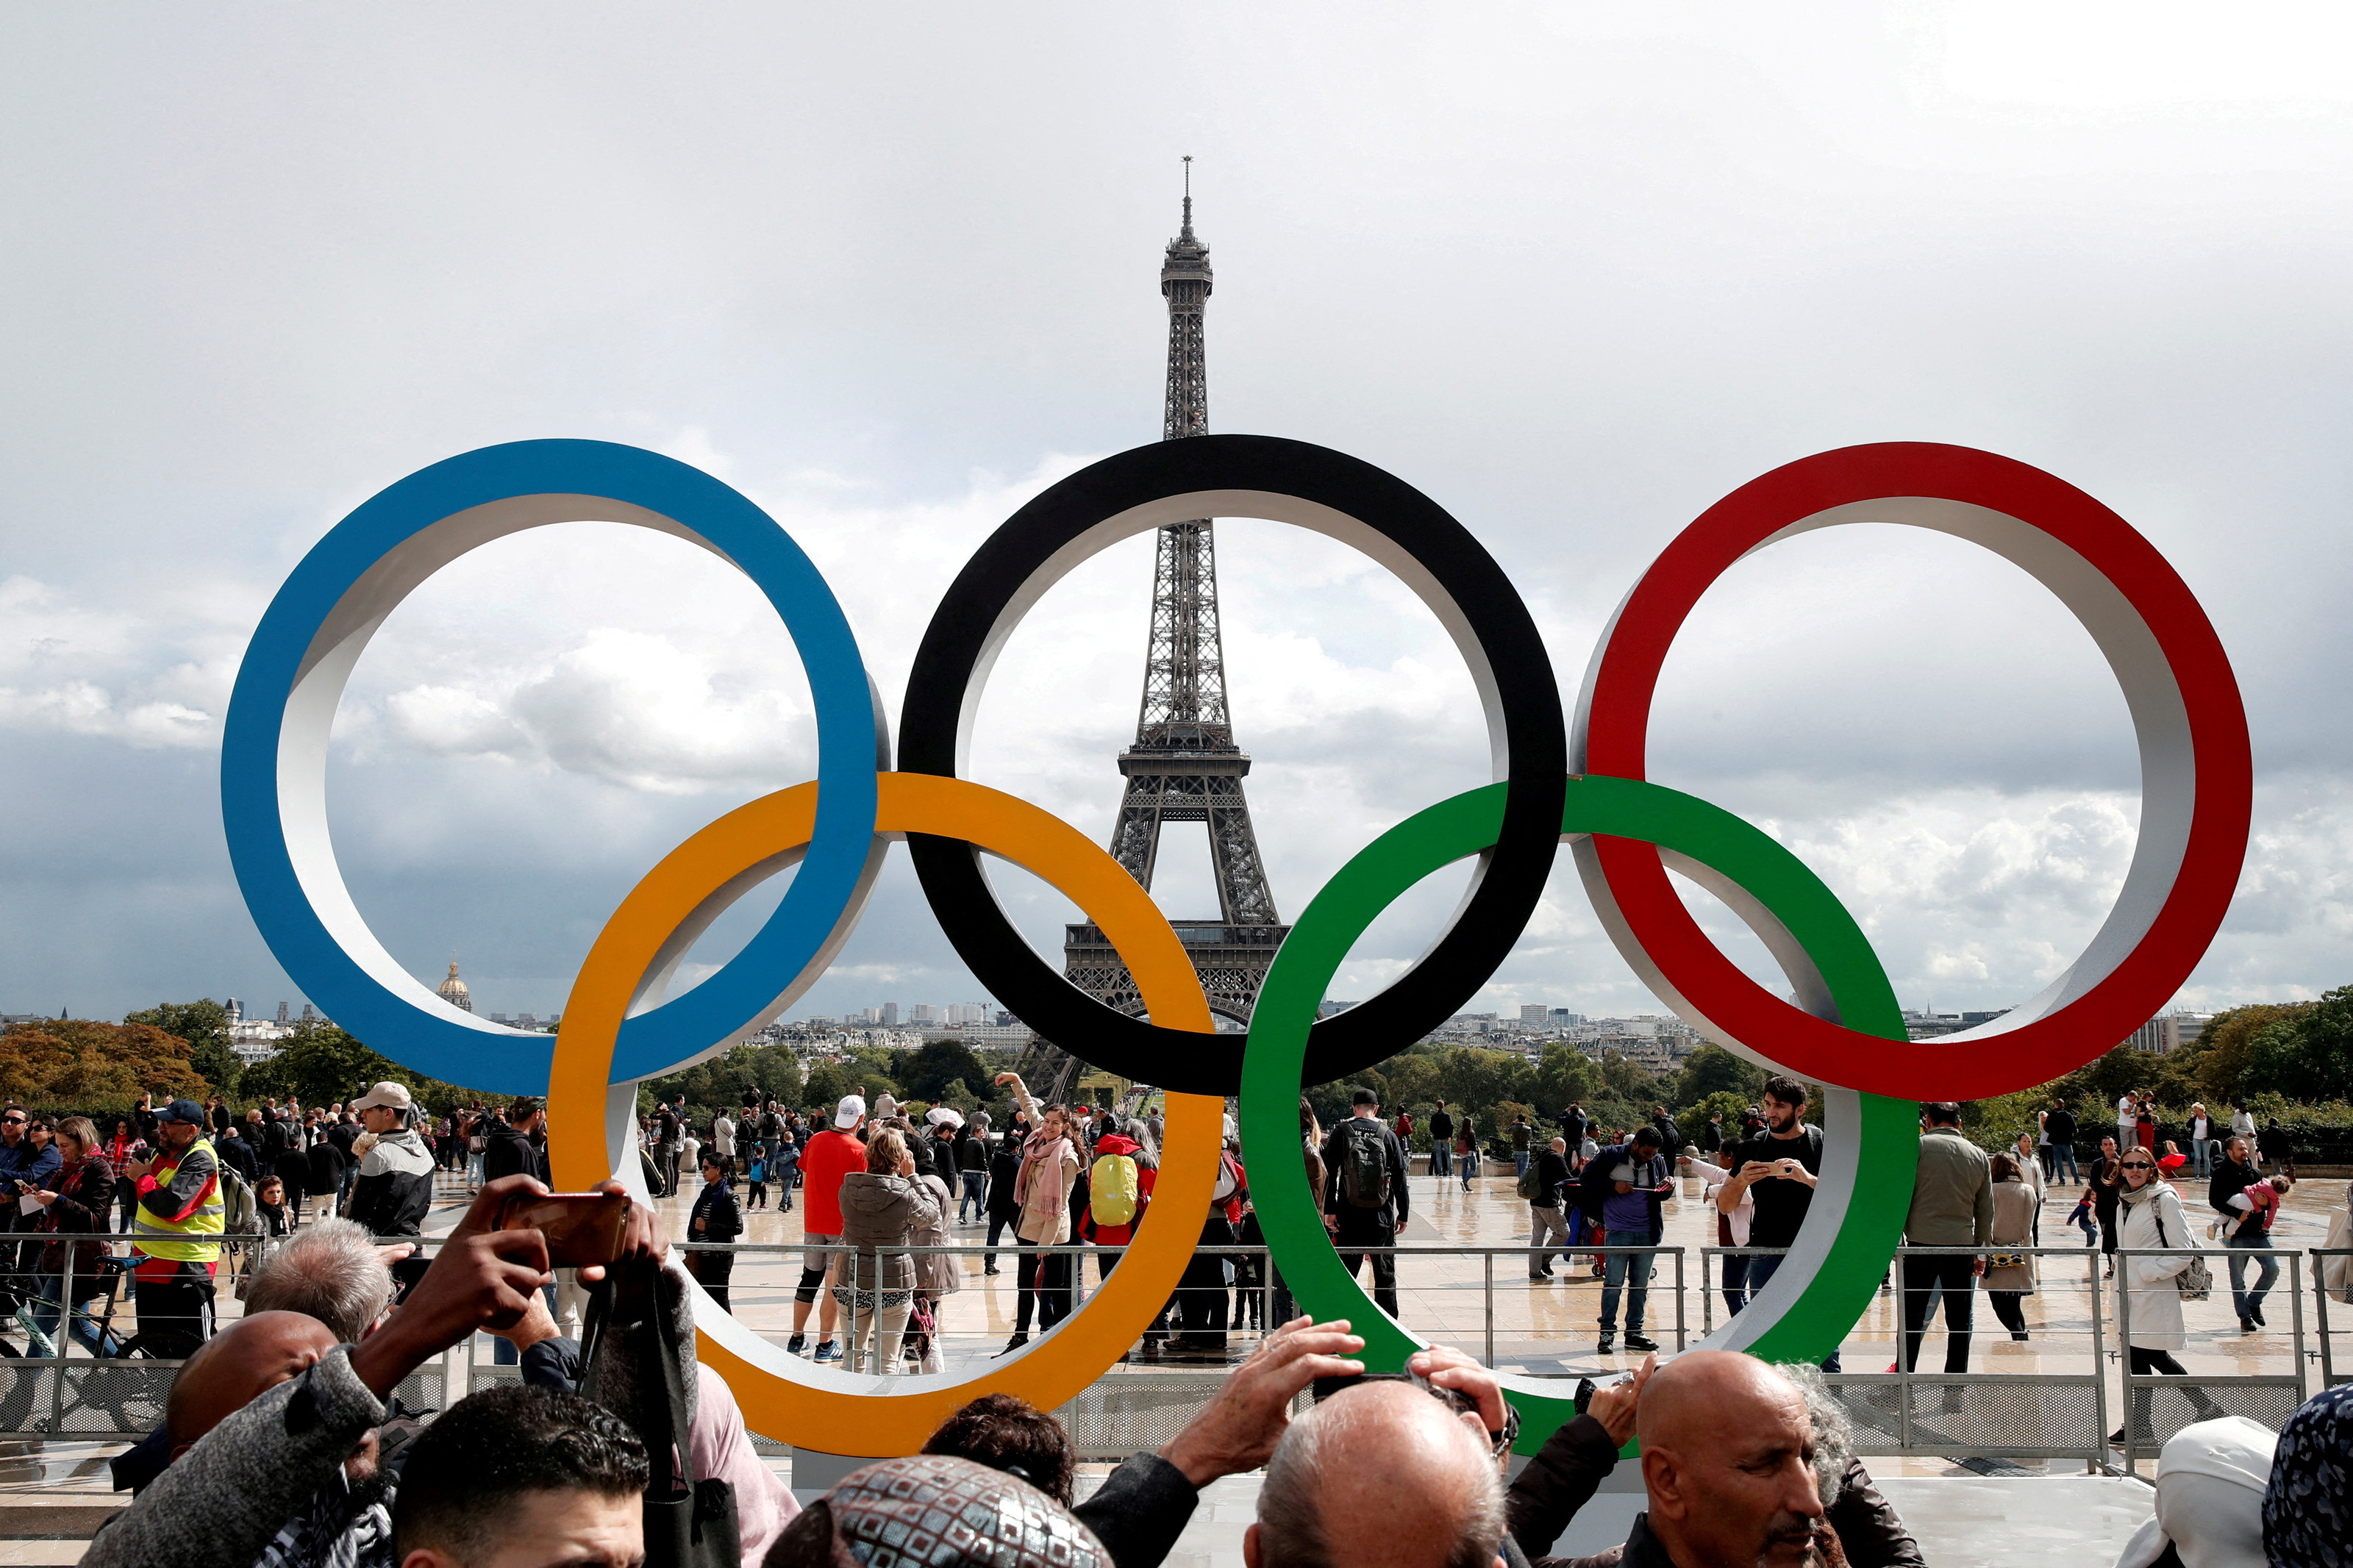 Olympic rings to celebrate the IOC official announcement that Paris won the 2024 Olympic bid are seen in fro